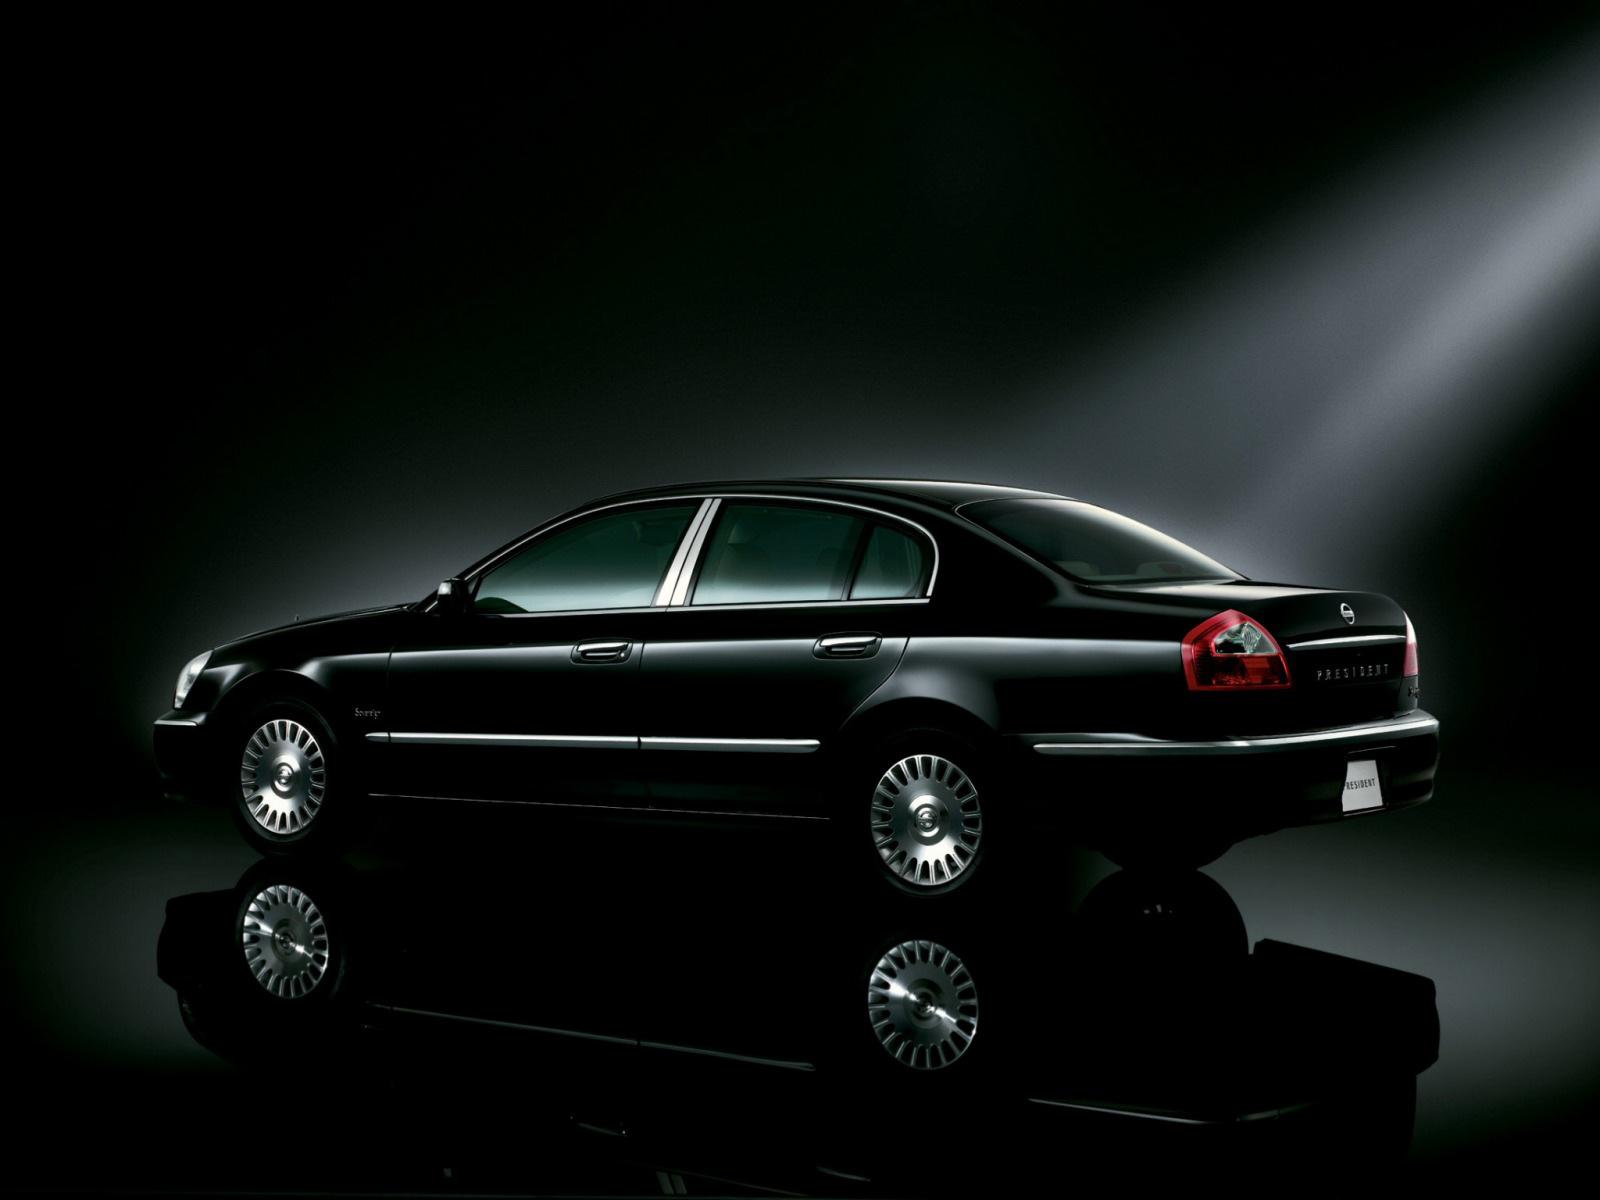 Nissan President picture. Nissan photo gallery